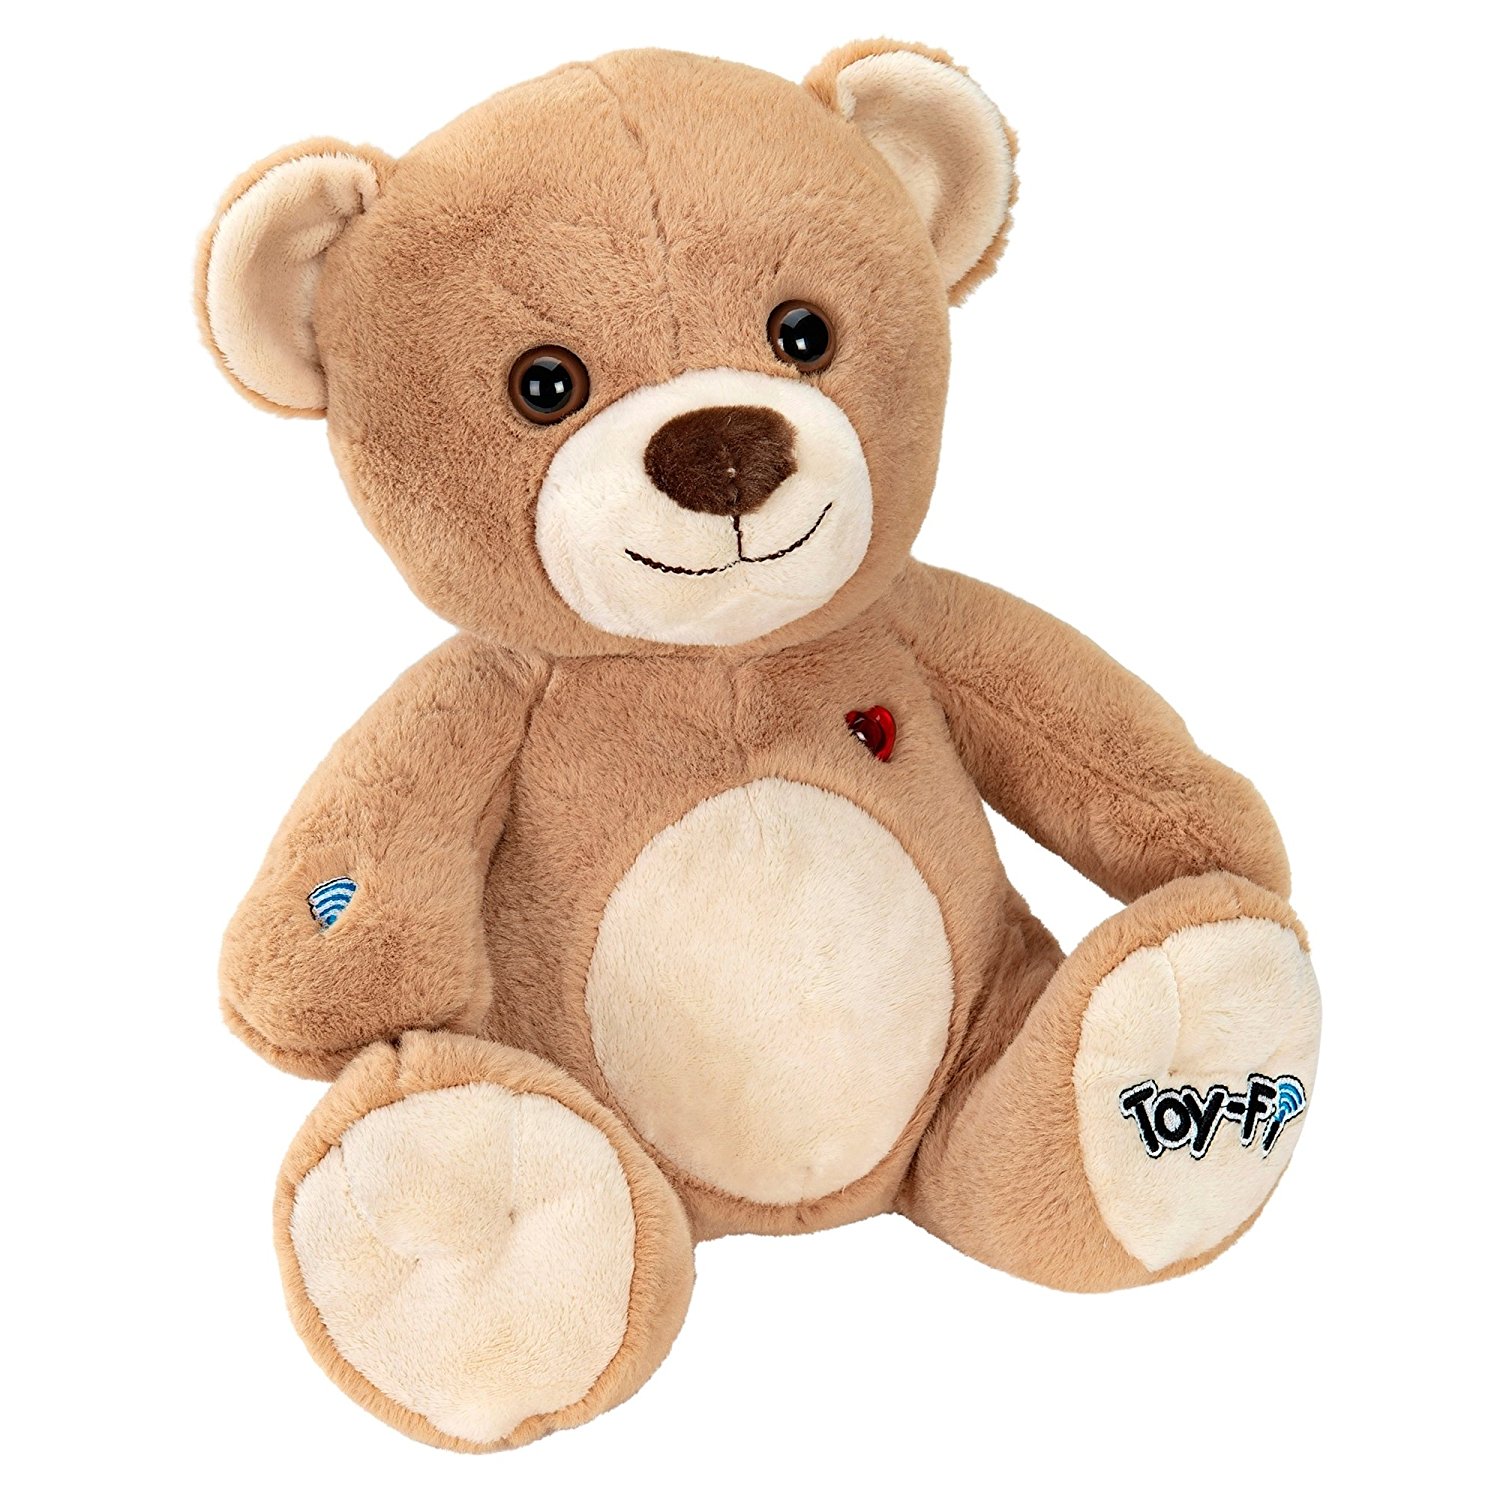 Amazon.com: Toy-Fi Teddy - Works With Smart Phones (Dispatched from ...